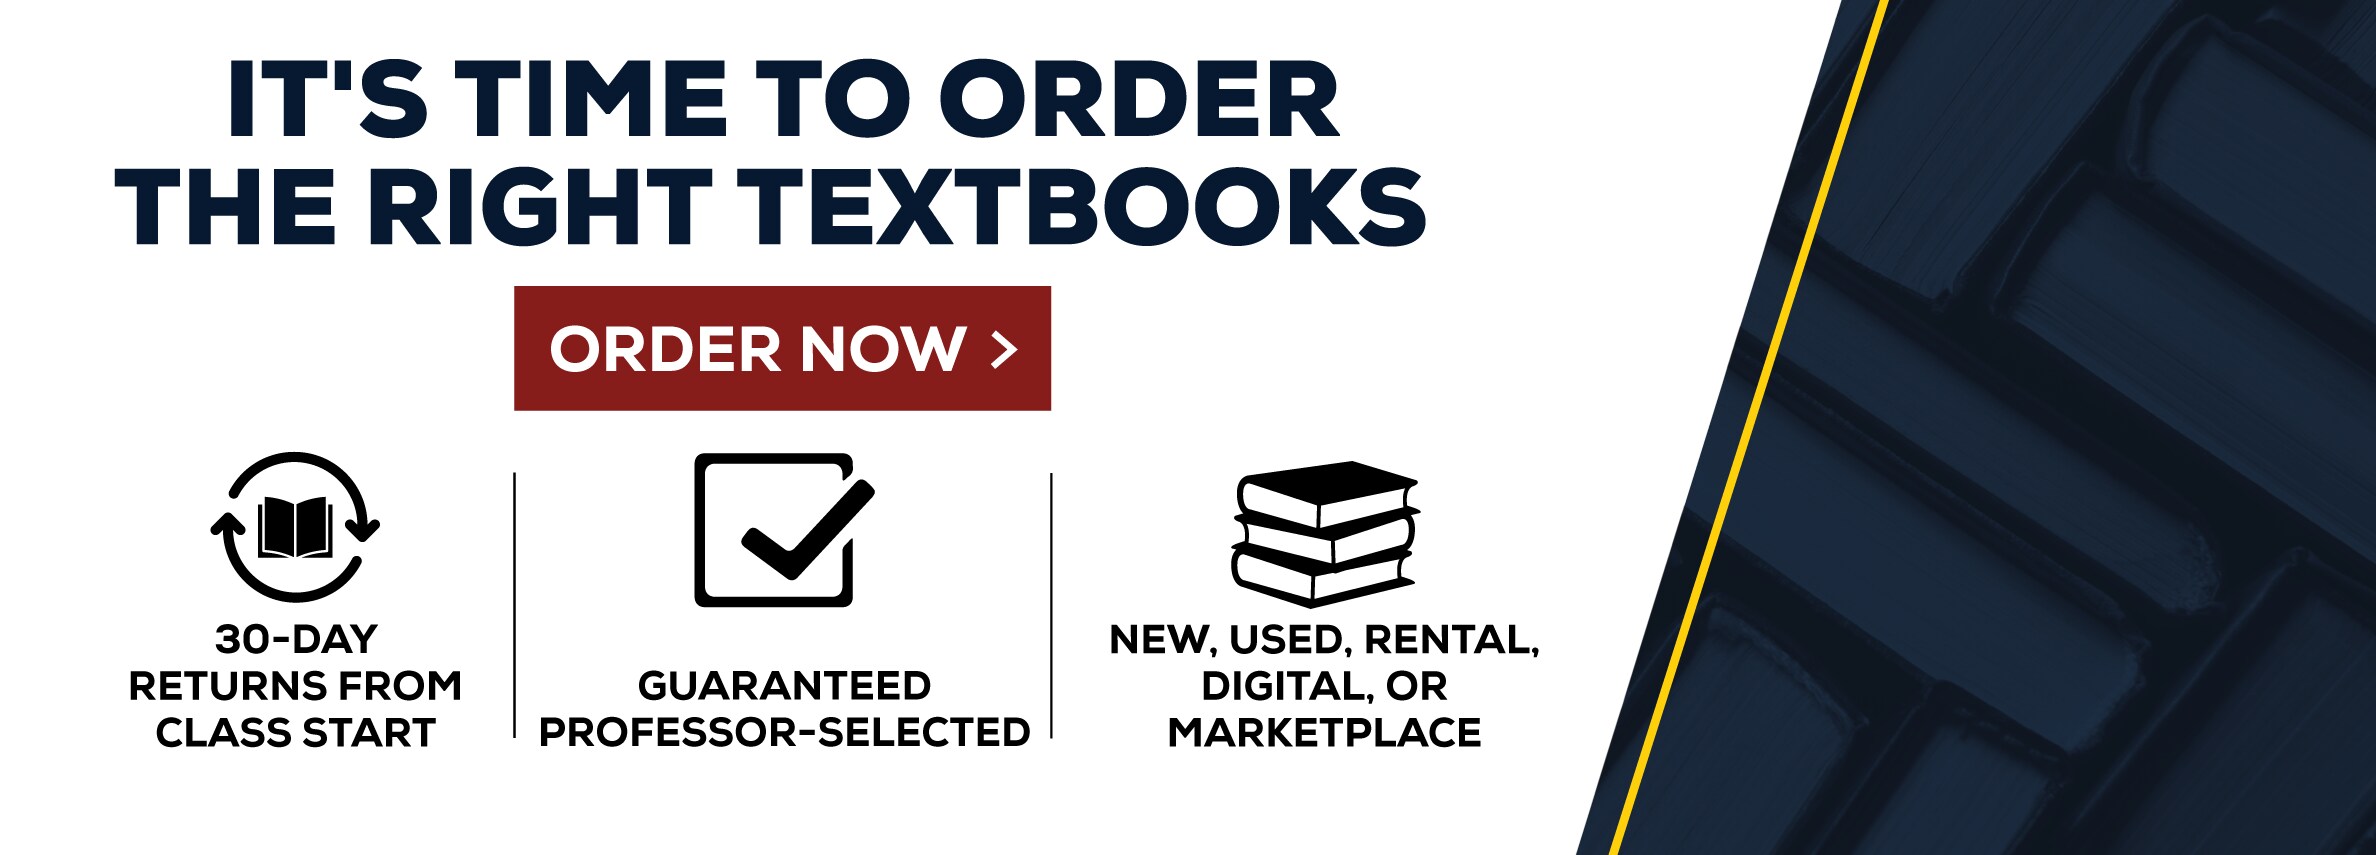 ItÃ¢â‚¬â„¢s time to order the right textbooks. Order now. 30-day returns from class start. Guaranteed professor-selected. New, Used, rental, digital, or marketplace.